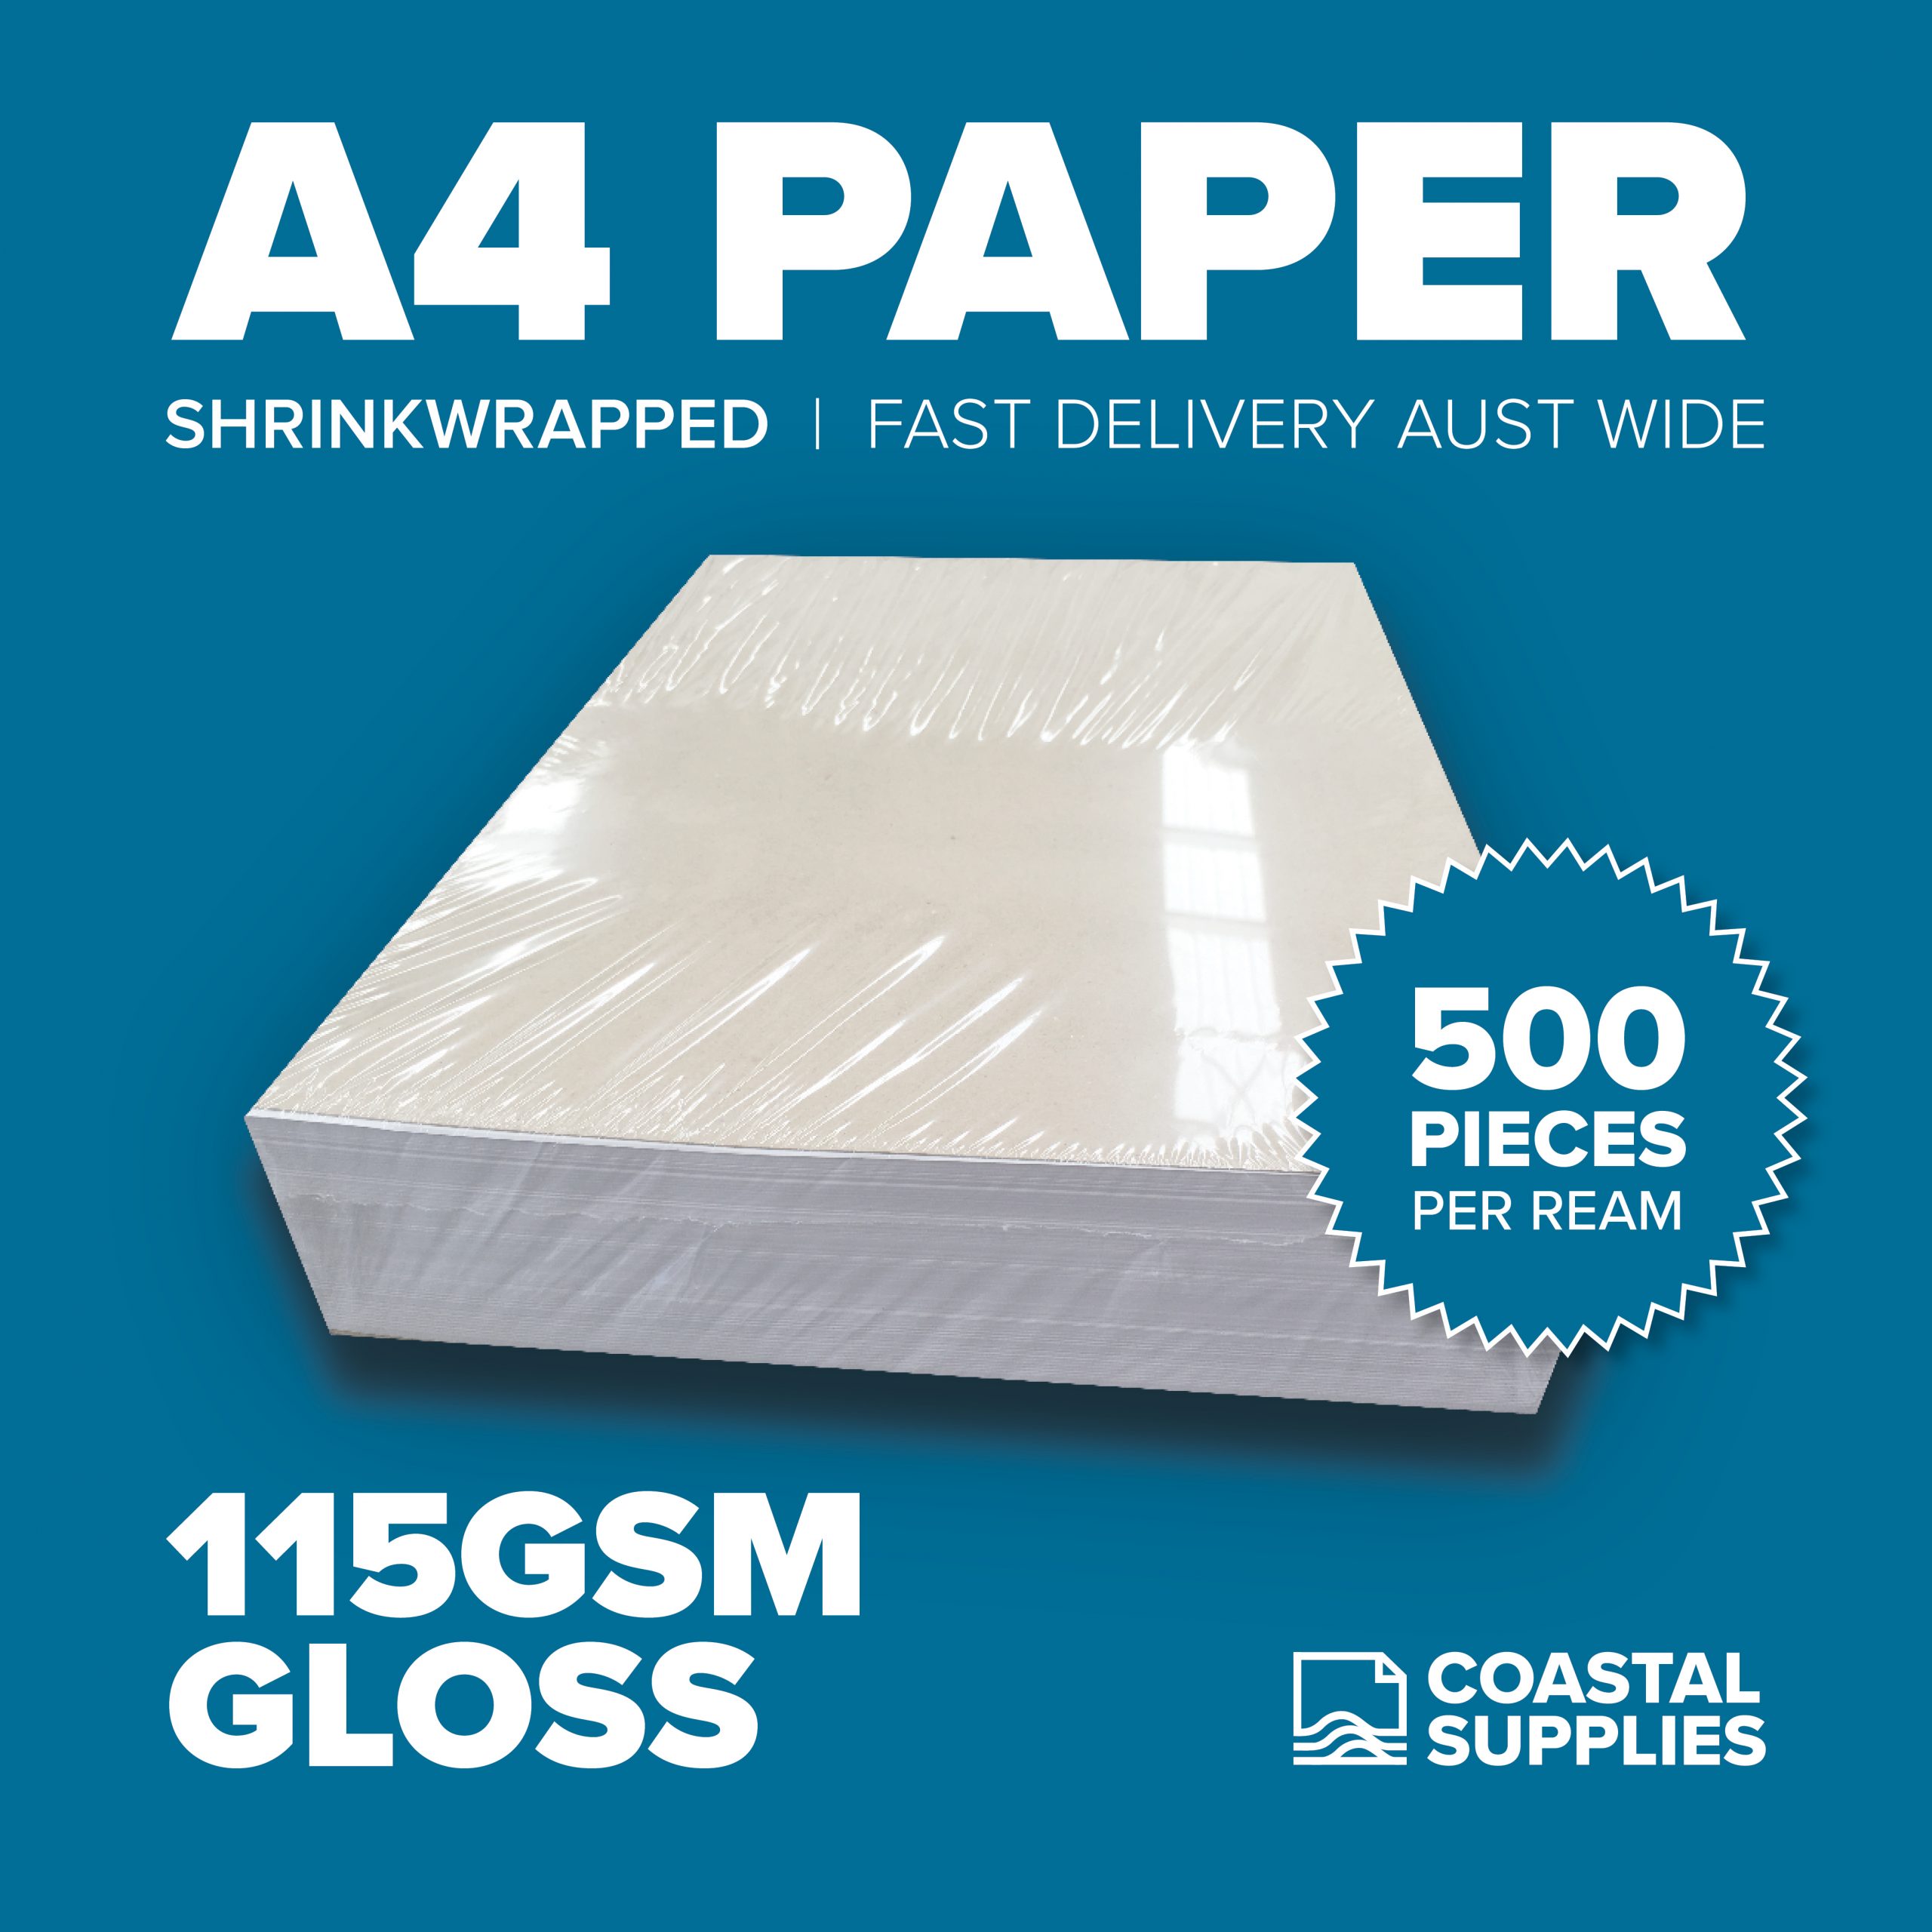 115gsm-gloss-a4-paper-coastal-supplies-paper-products